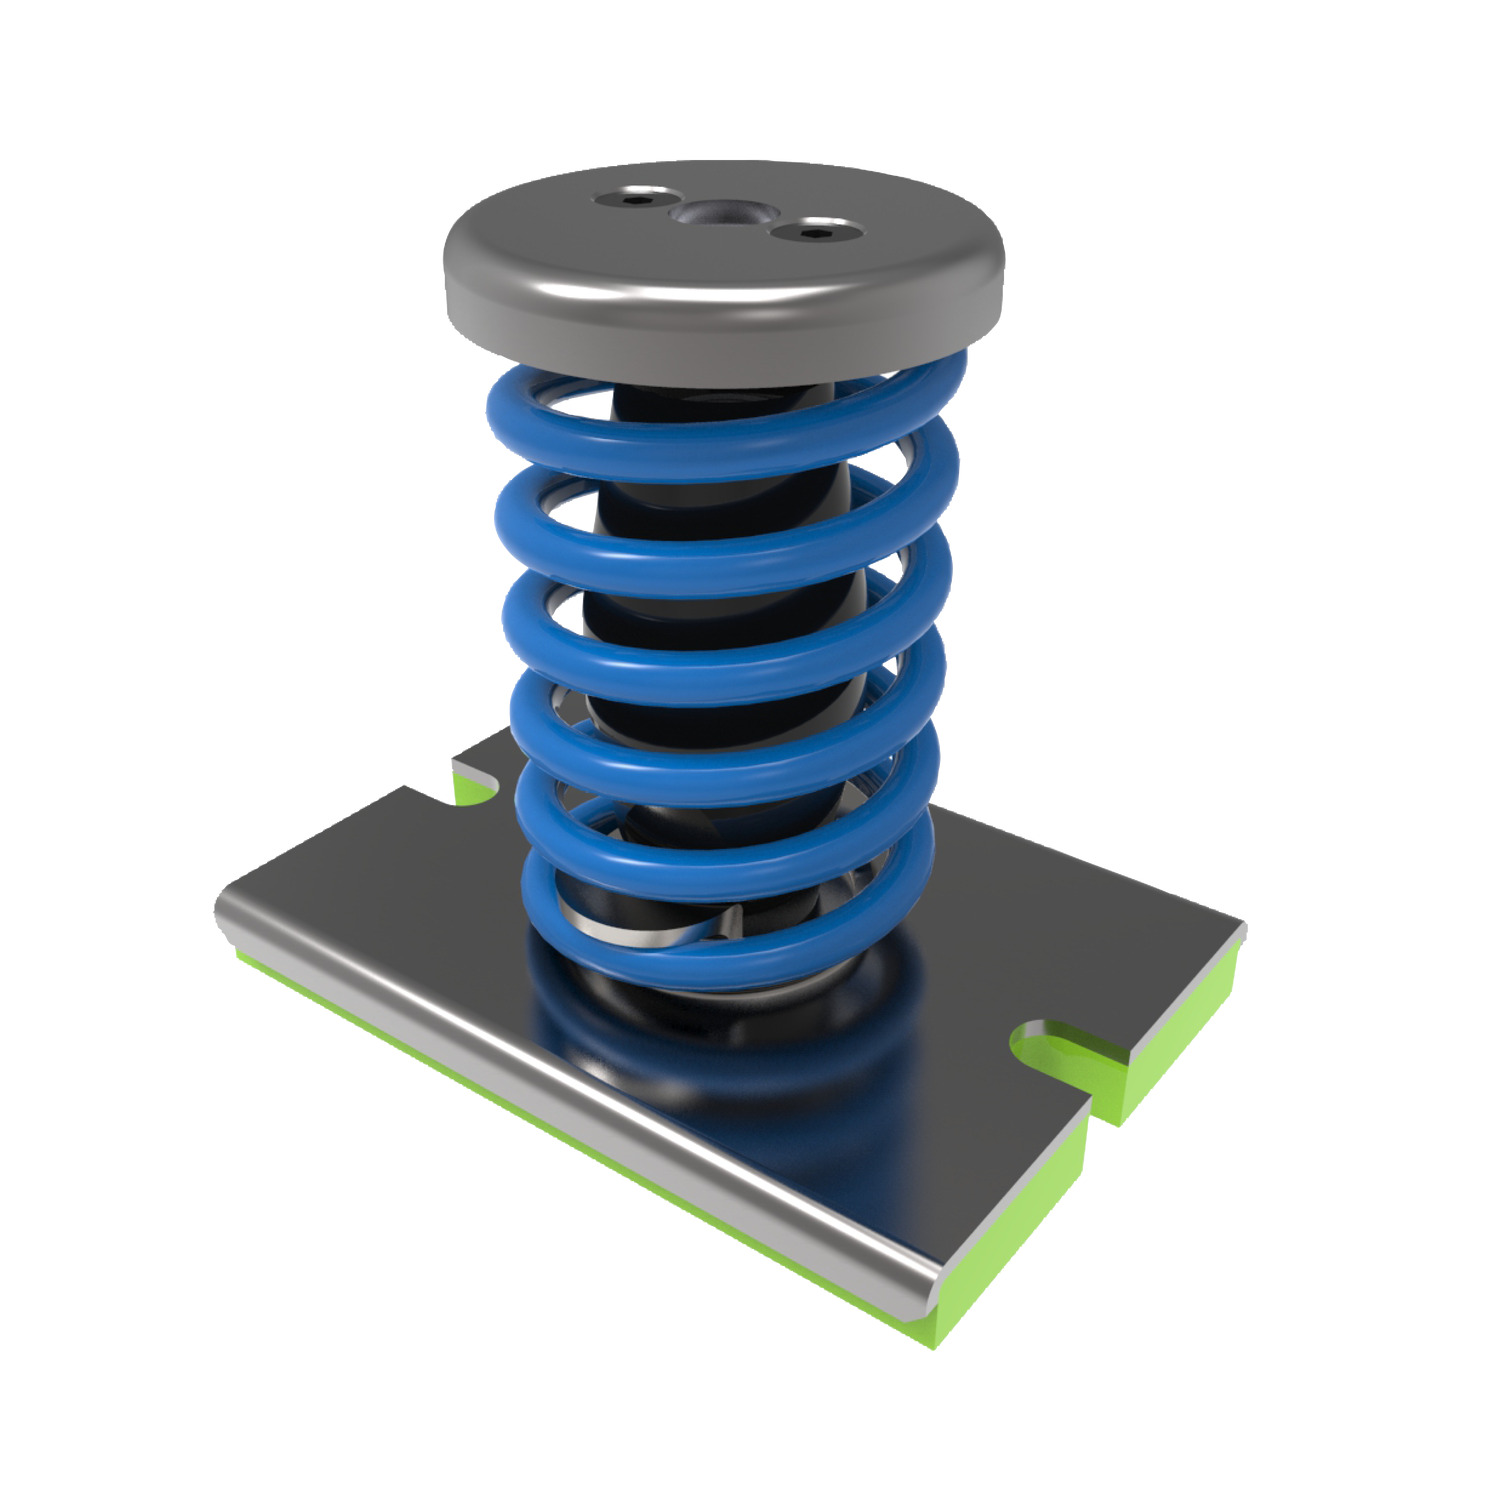 Spring Vibration Damper one spring The sylomer mat that these dampers incorporate, isolates the mid-high frequency vibrations which are transmitted through the coils of the metal springs.